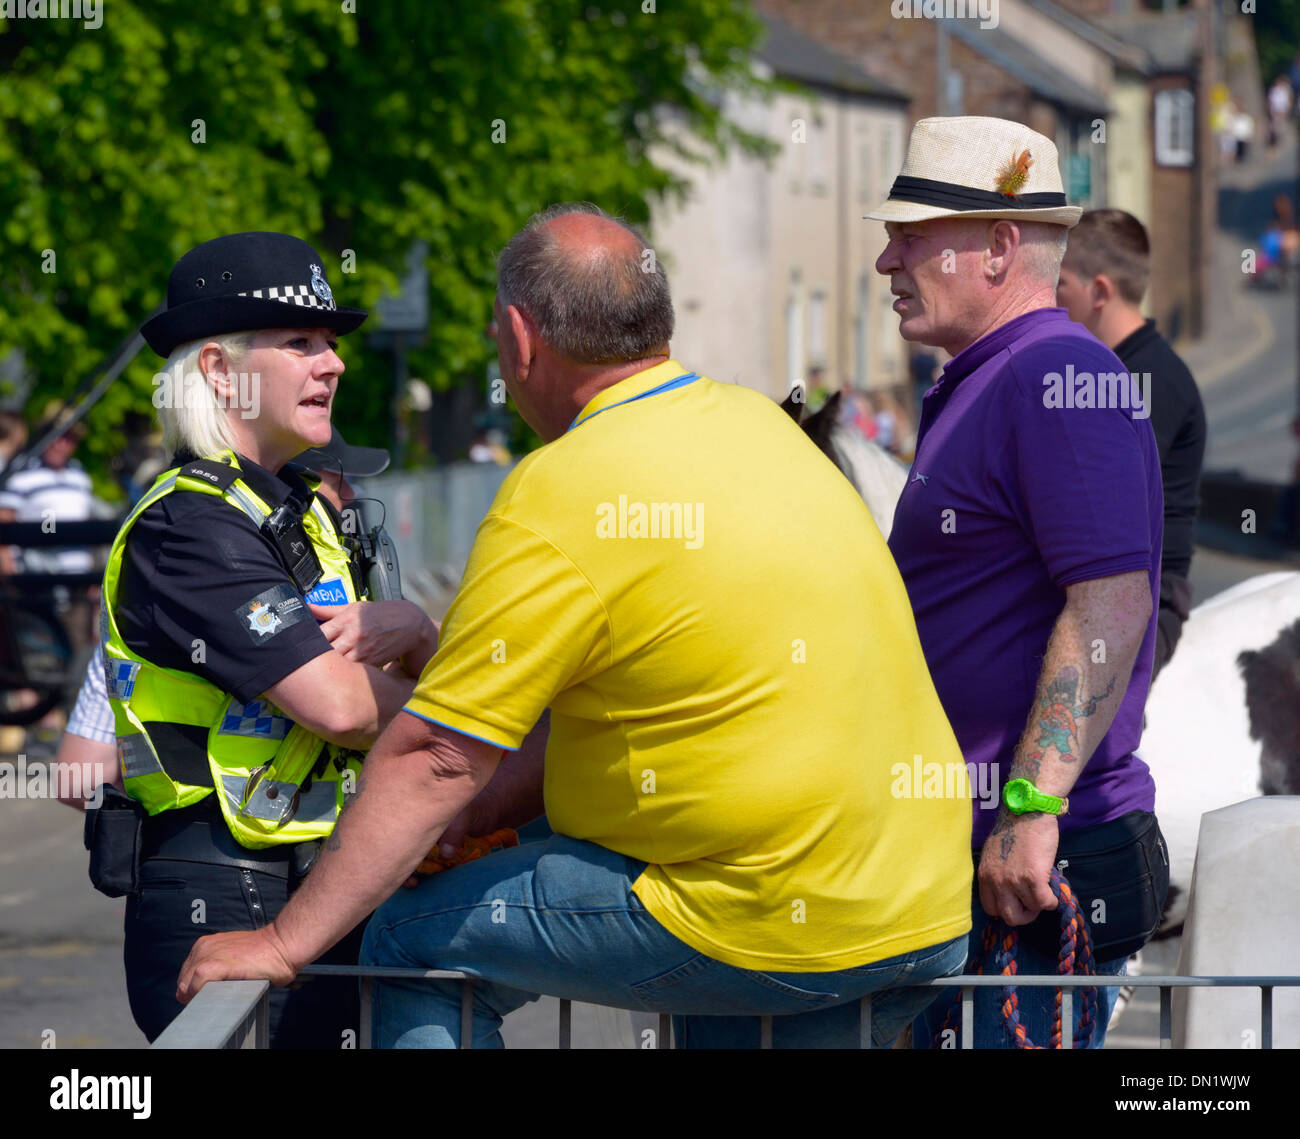 Policewomen talking to gypsy travellers. Appleby Horse Fair, Appleby-in-Westmorland, Cumbria, England, United Kingdom, Europe. Stock Photo